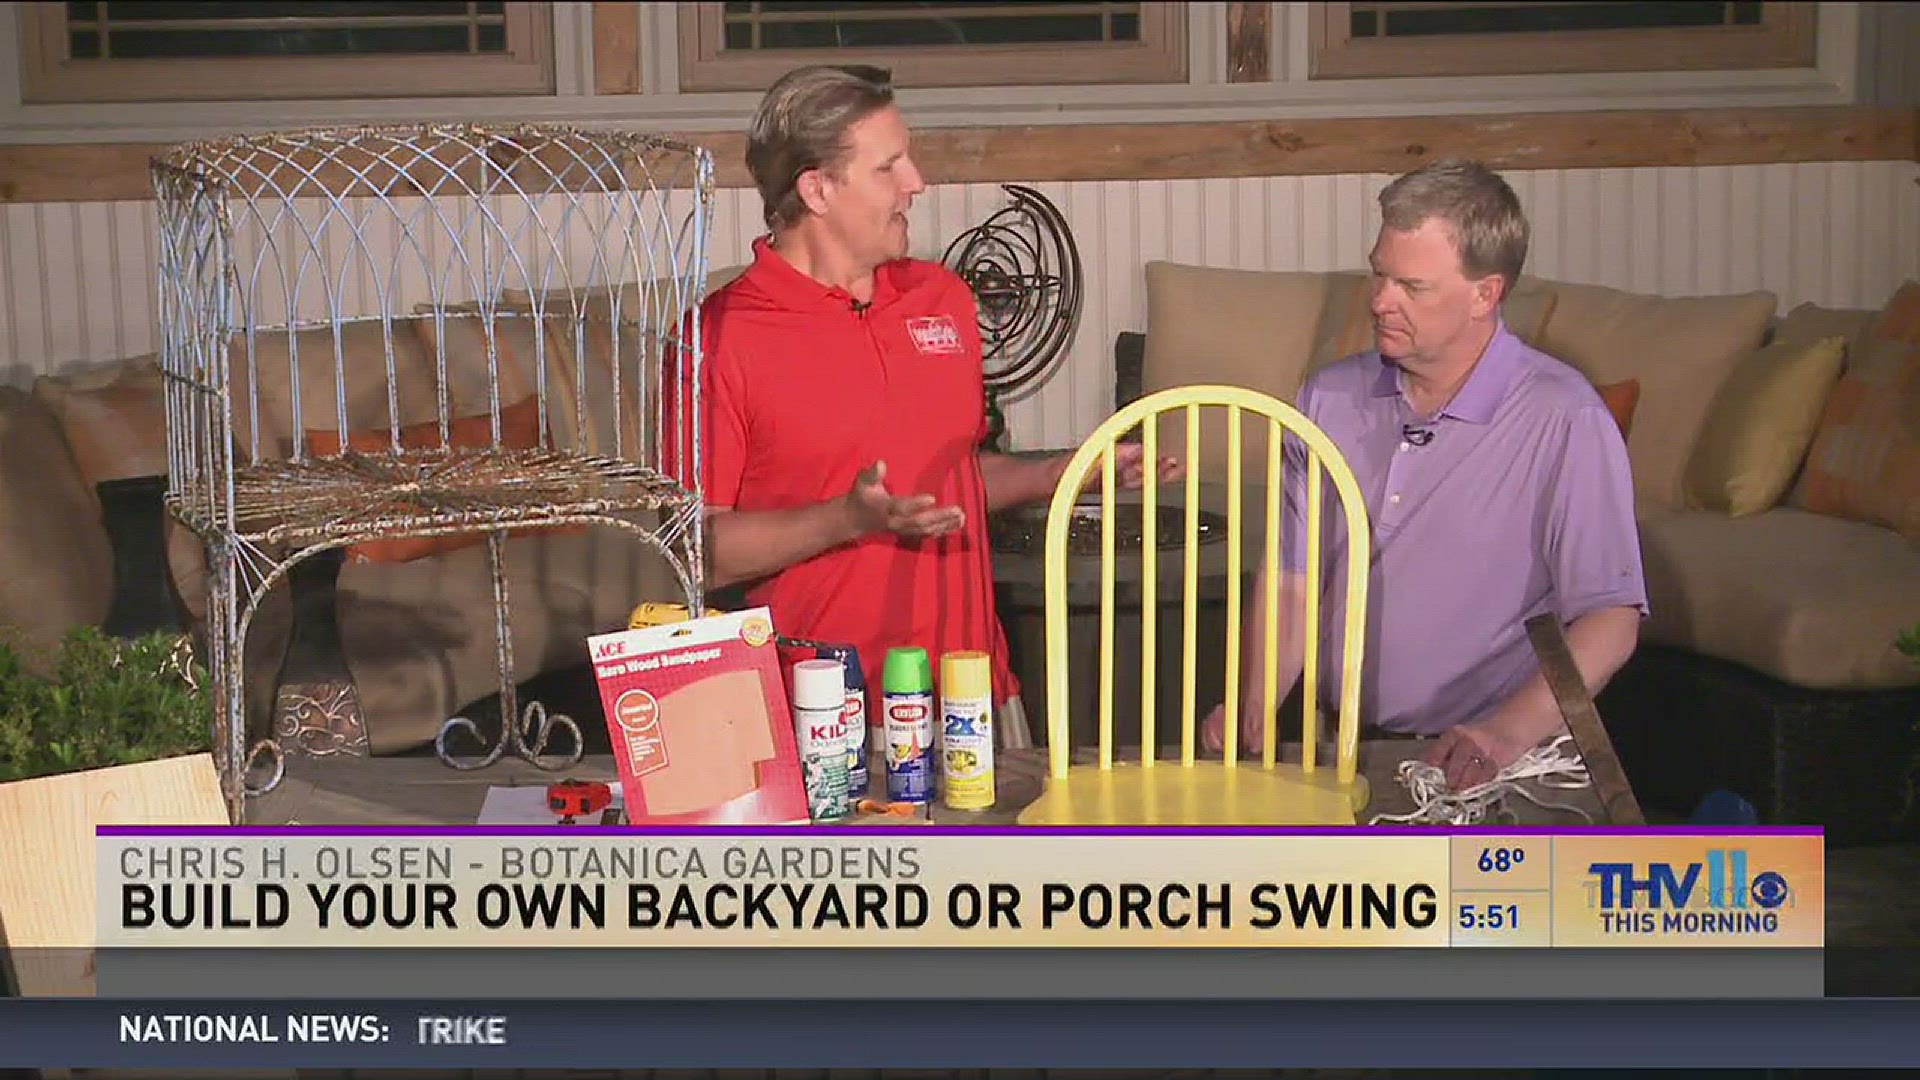 Add color and whimsy to a porch or backyard with an old wooden chair, some paint, and some rope. --THV11.com 05/25/16